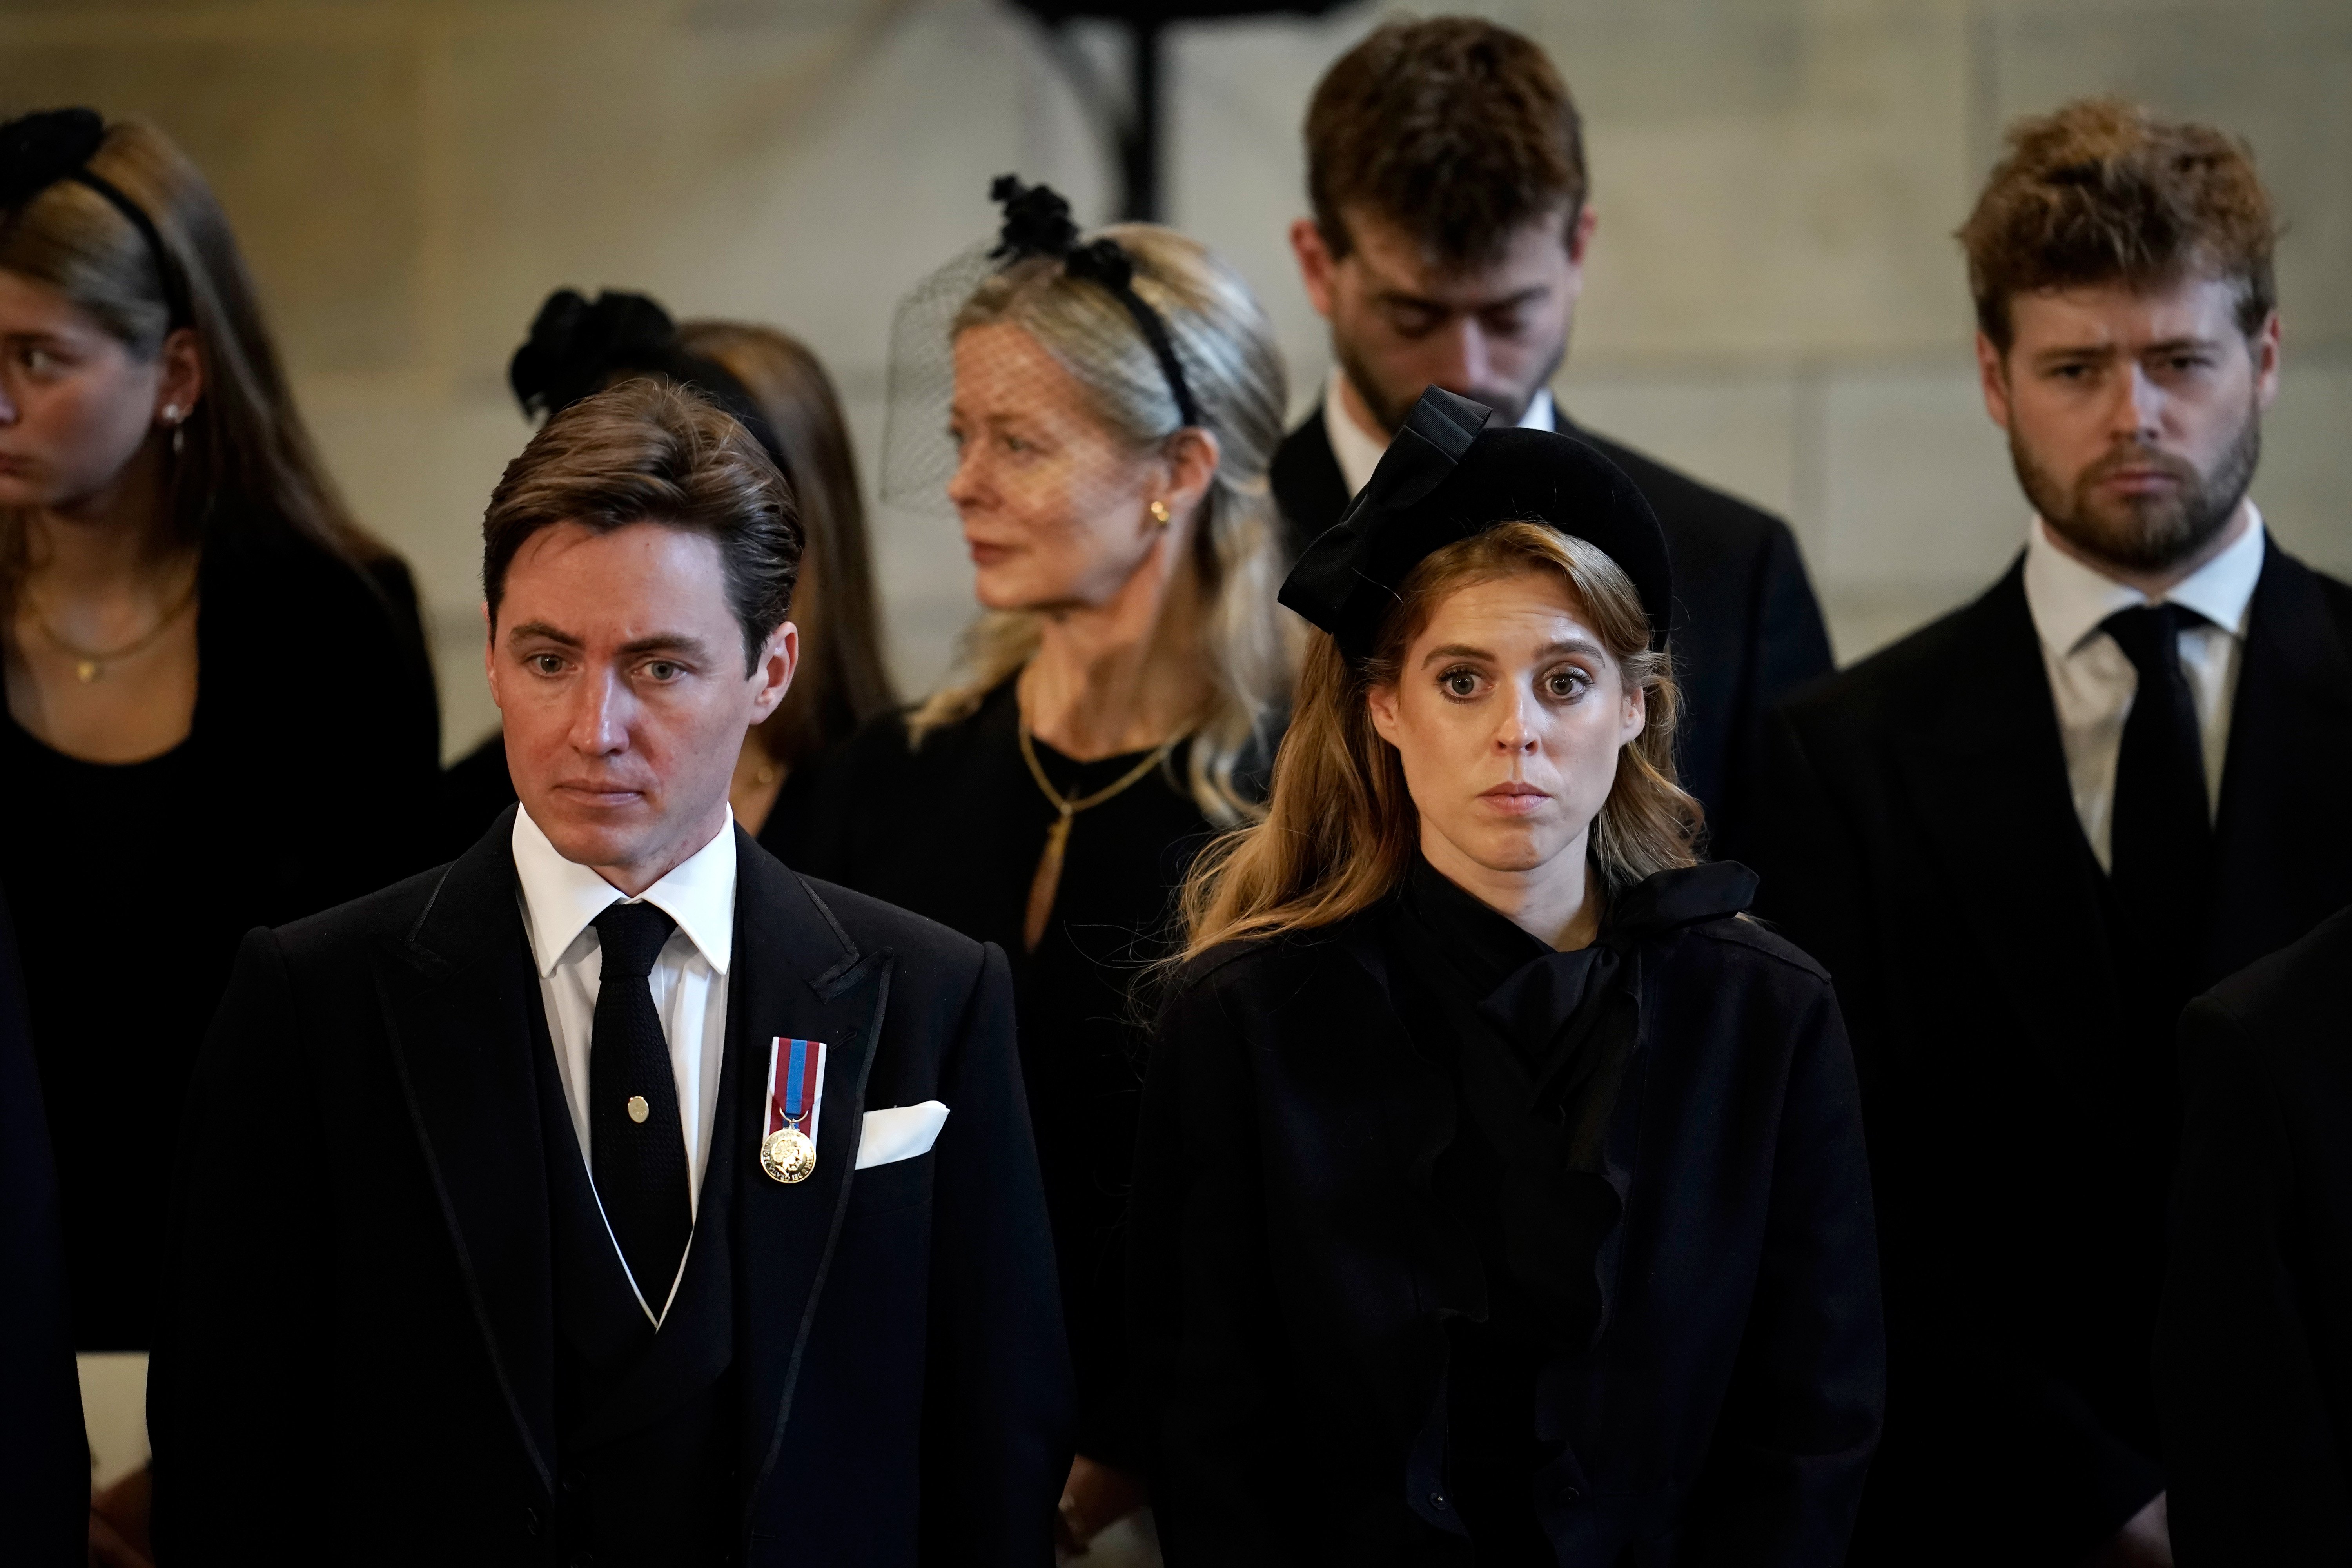 Edoardo Mapelli Mozzi and Princess Beatrice pay their respects in The Palace of Westminster during the procession for the Lying-in State of Queen Elizabeth II on September 14, 2022 in London, England | Source: Getty Images 